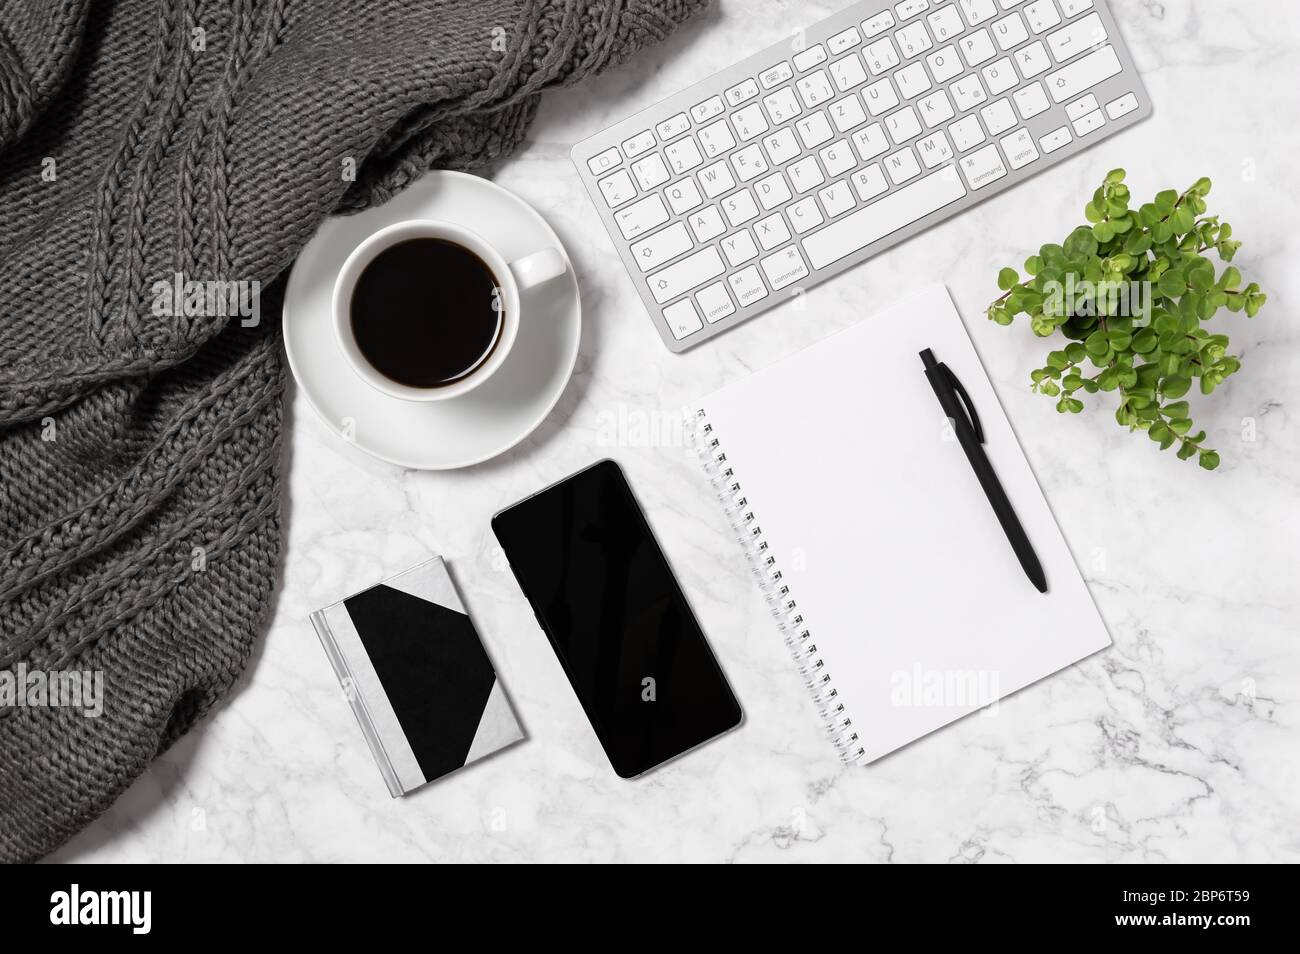 Cozy home office workspace. Marble desk with warm wool plaid, cup of coffee, keyboard, mobile phone, green house plant, blank paper, notebook and pen Stock Photo